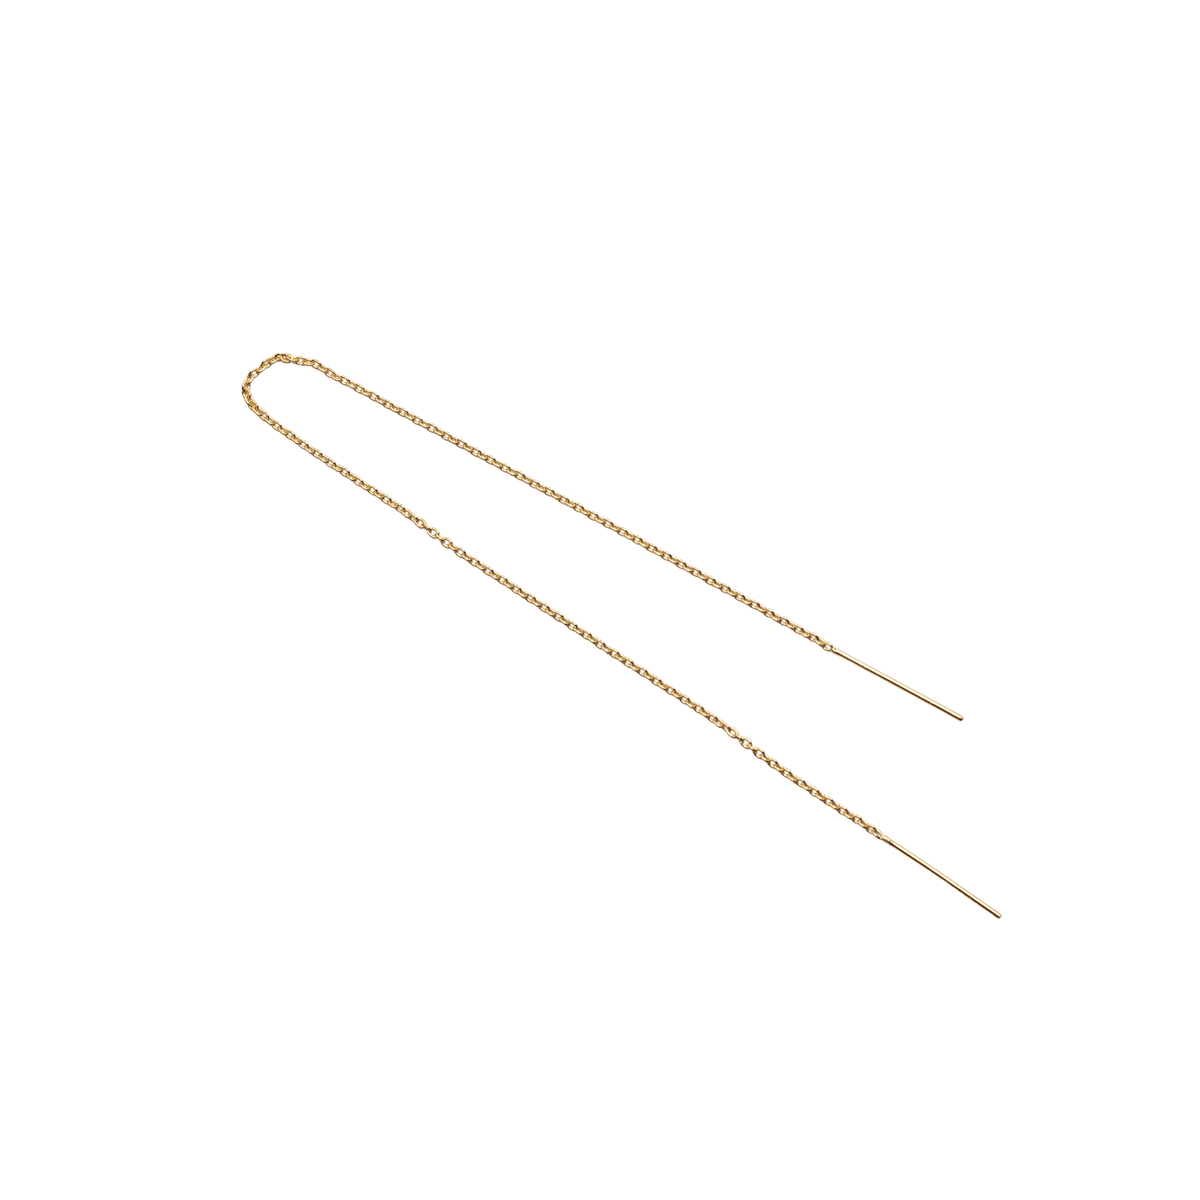 Yellow Gold Threaders Ultra-Long Signature Threader Earrings The Curated Lobe